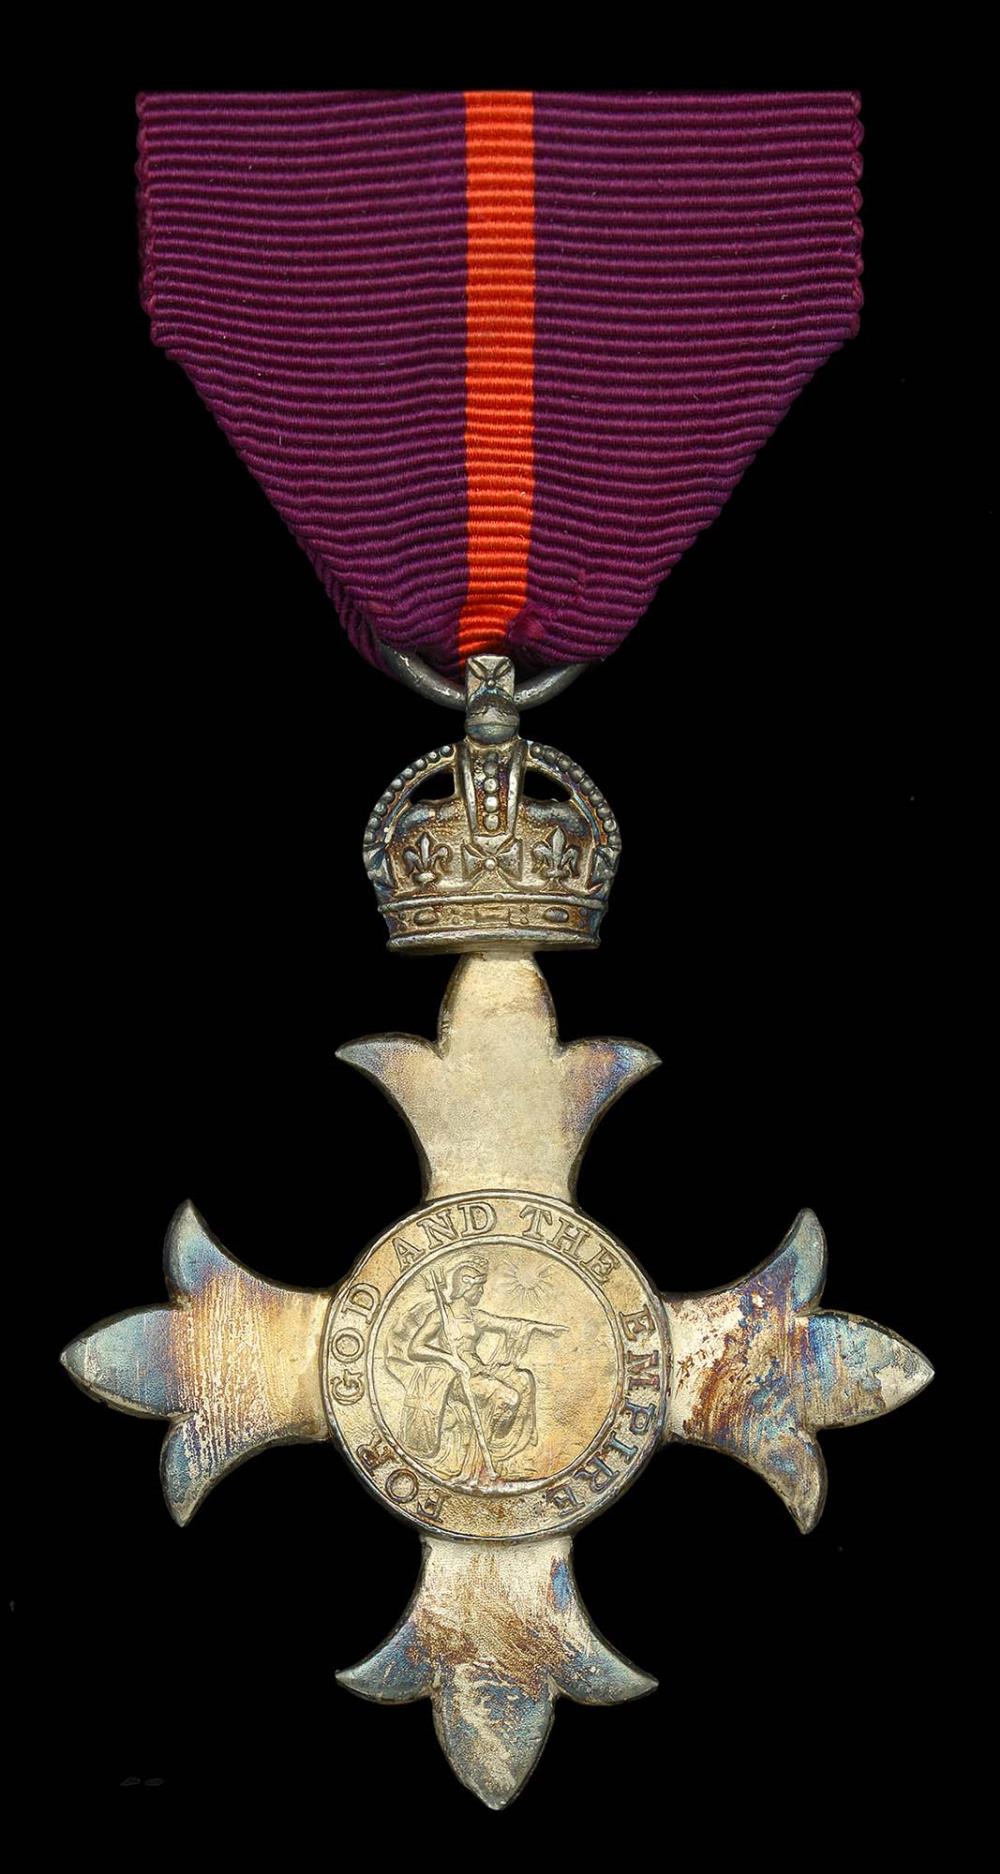 Worcestershire Medal Service: MBE (Military) 1st type